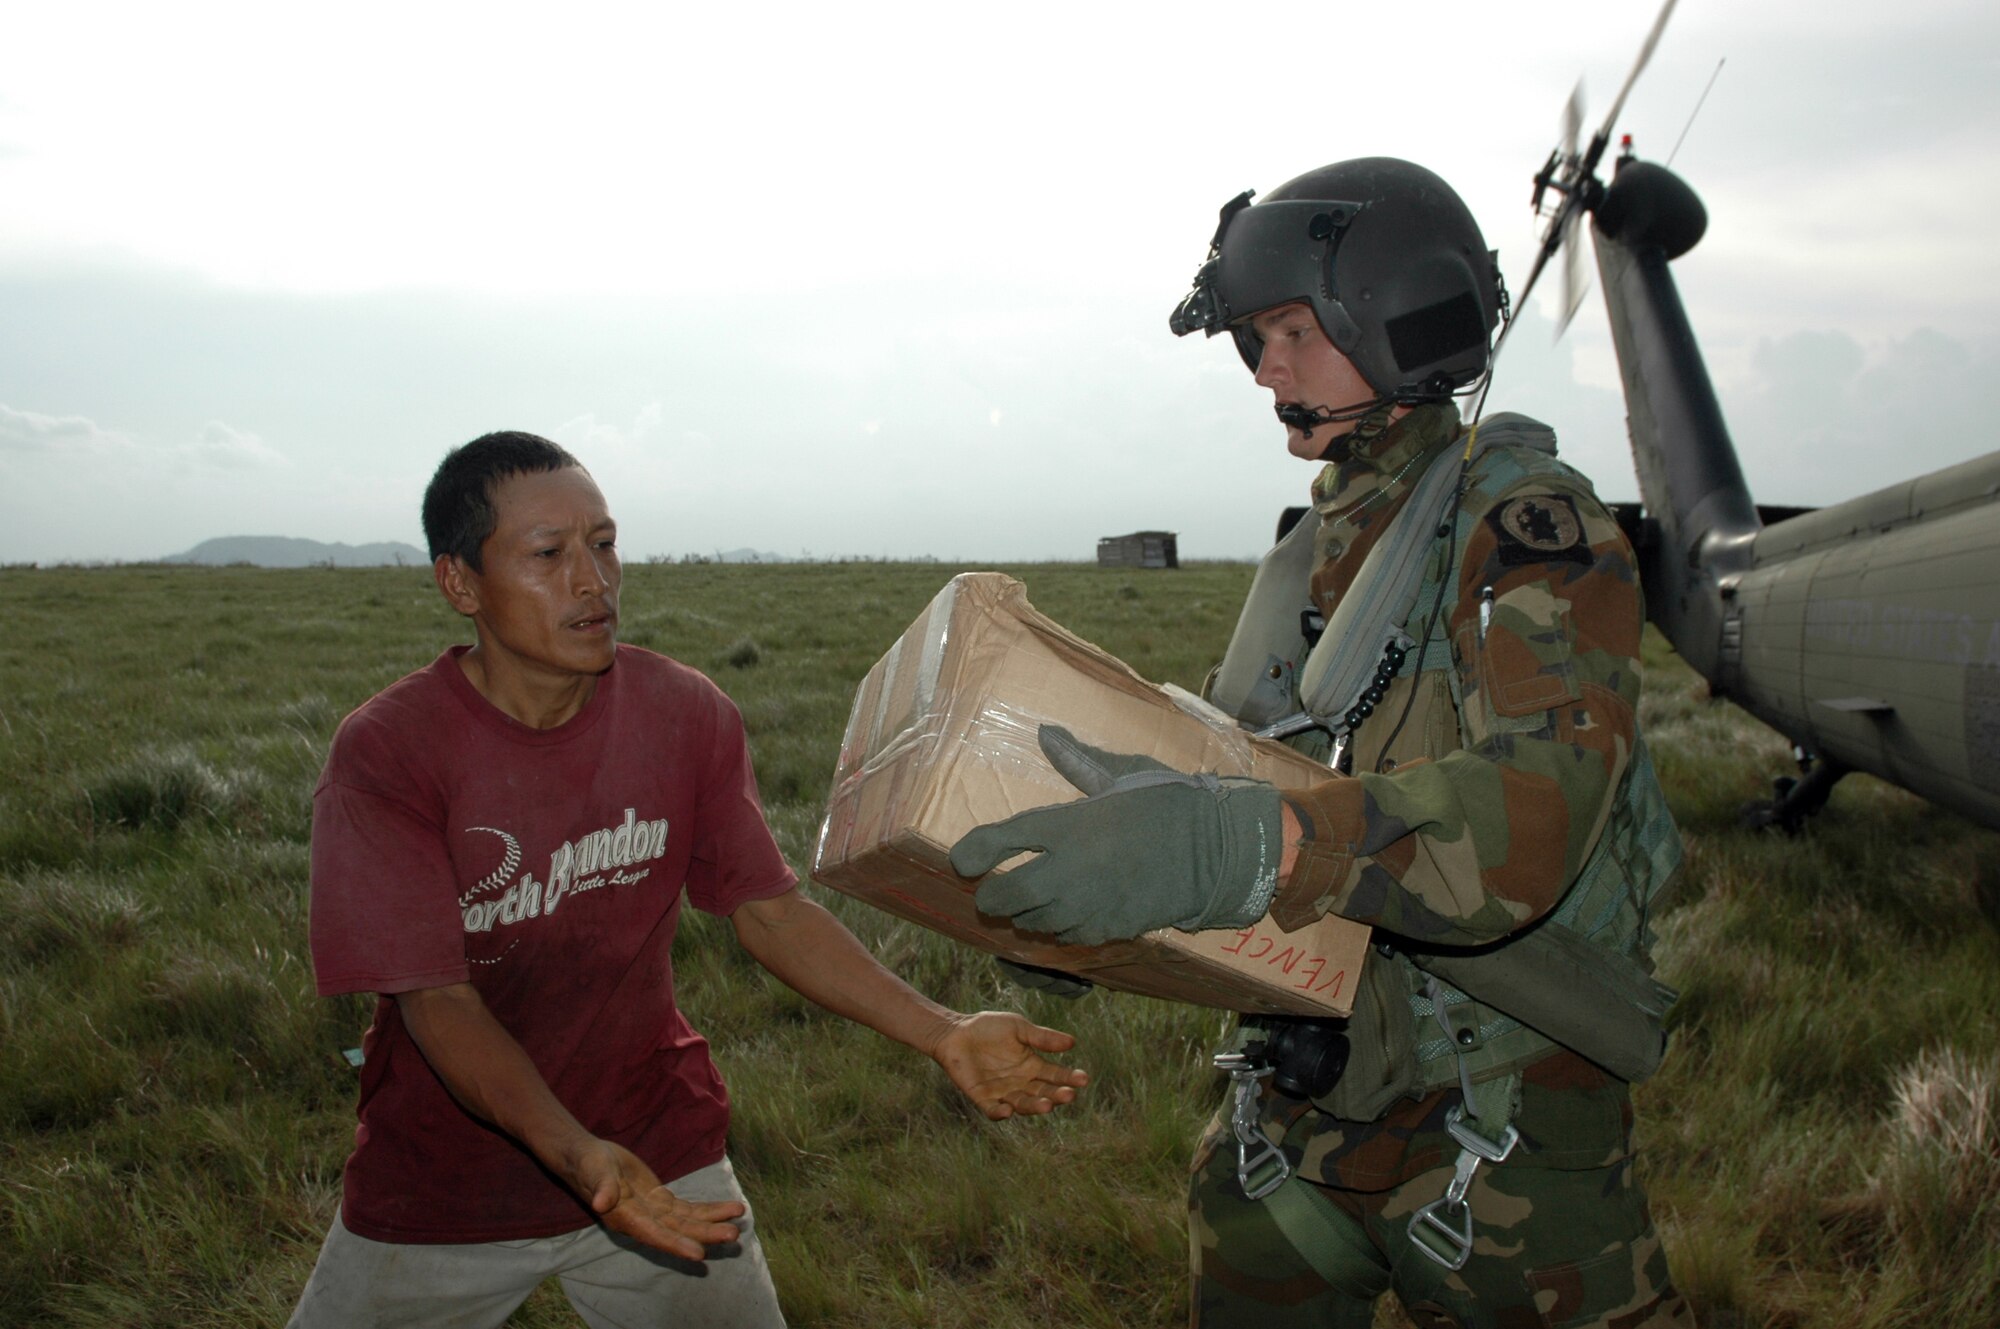 PUERTO CABEZAS, Nicaragua – Spc. Lucas Gomez hands a box of food to a local man here Sept. 15.  Specialist Gomez is part of the 1-228th Aviation Battalion deployed to Nicaragua from Soto Cano Air Base in Honduras, to provide relief after Hurricane Felix.  The U.S. State Department and Department of Defense are working together to bring food, water and other needed items to small communities on the Nicaraguan coast that were affected by the hurricane.  (Army photo by Specialist Grant Vaught)